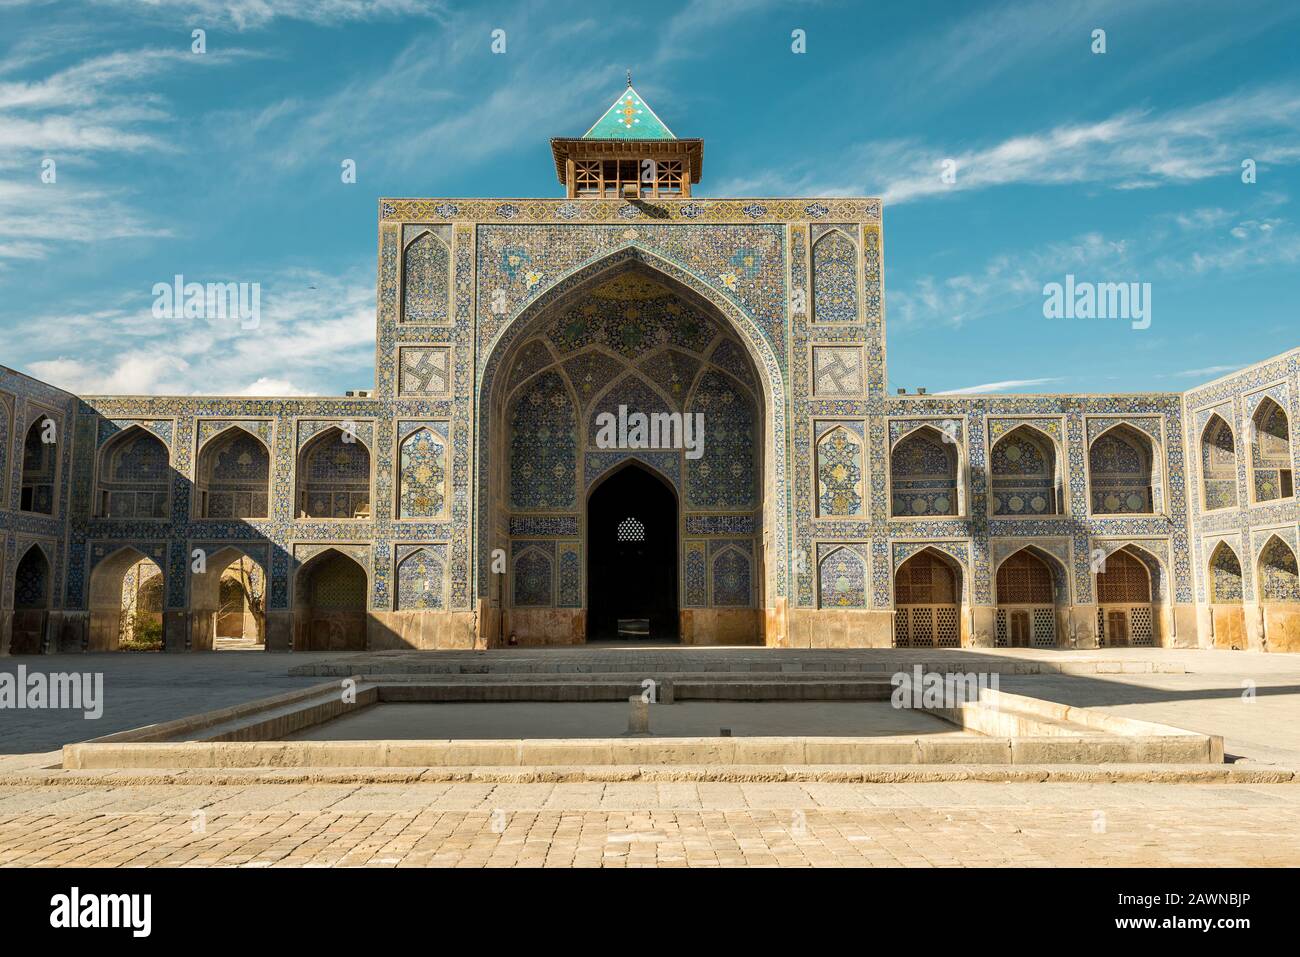 View of Shah Abbas Mosque, unesco heritage site, inside courtyard with iwan, Esfahan, Iran Stock Photo